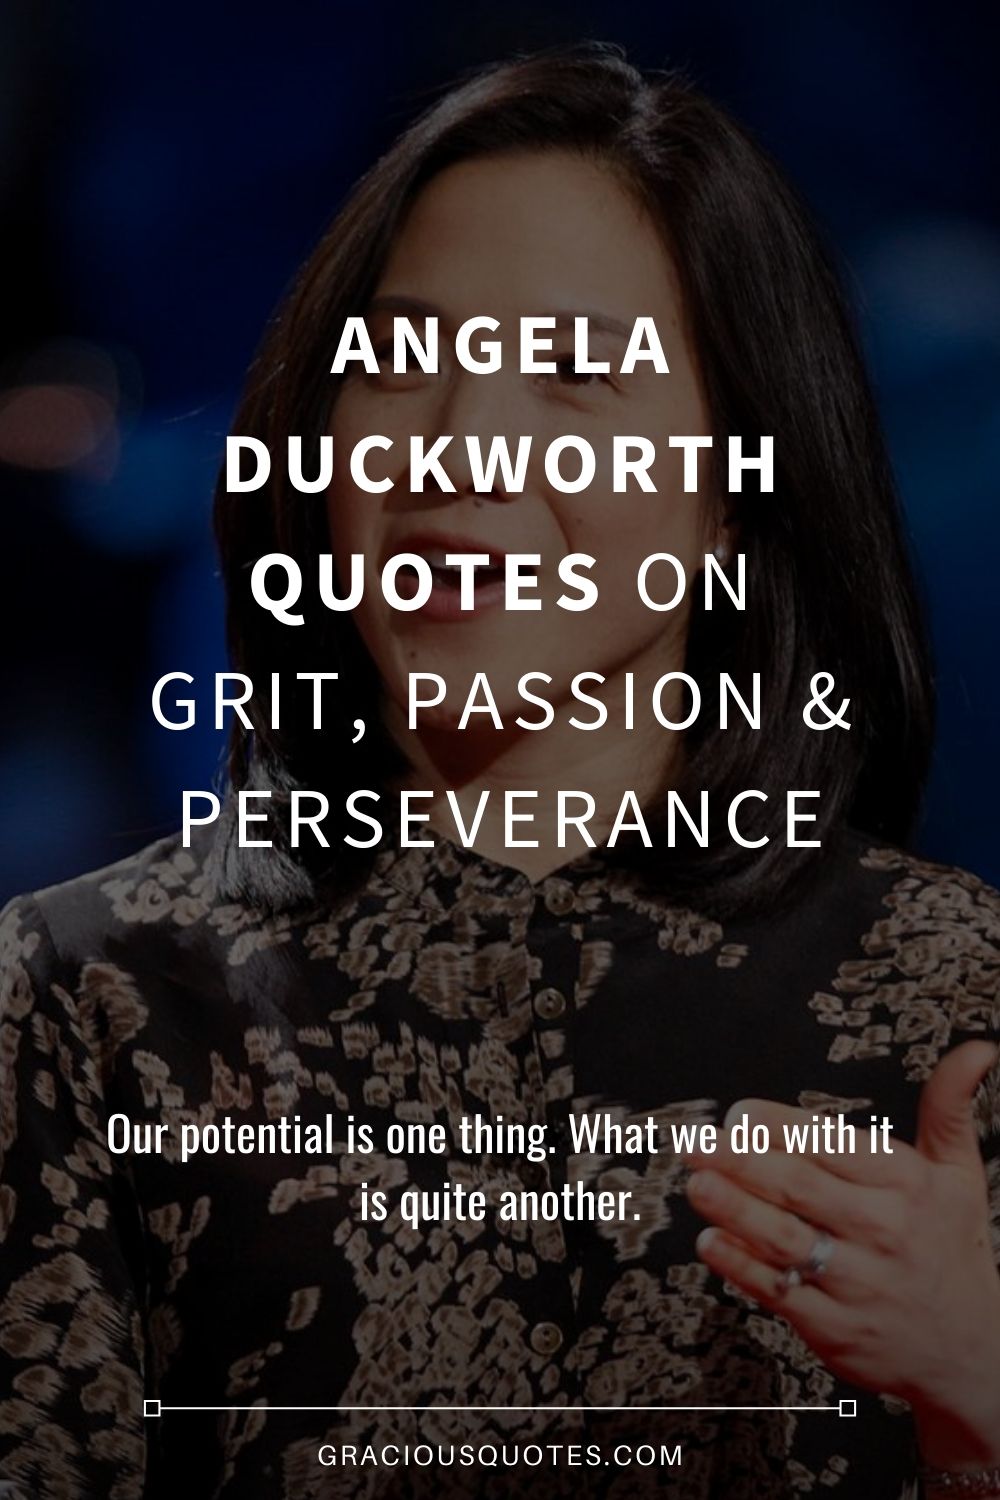 Angela Duckworth Quotes on Grit, Passion & Perseverance - Gracious Quotes.jpg